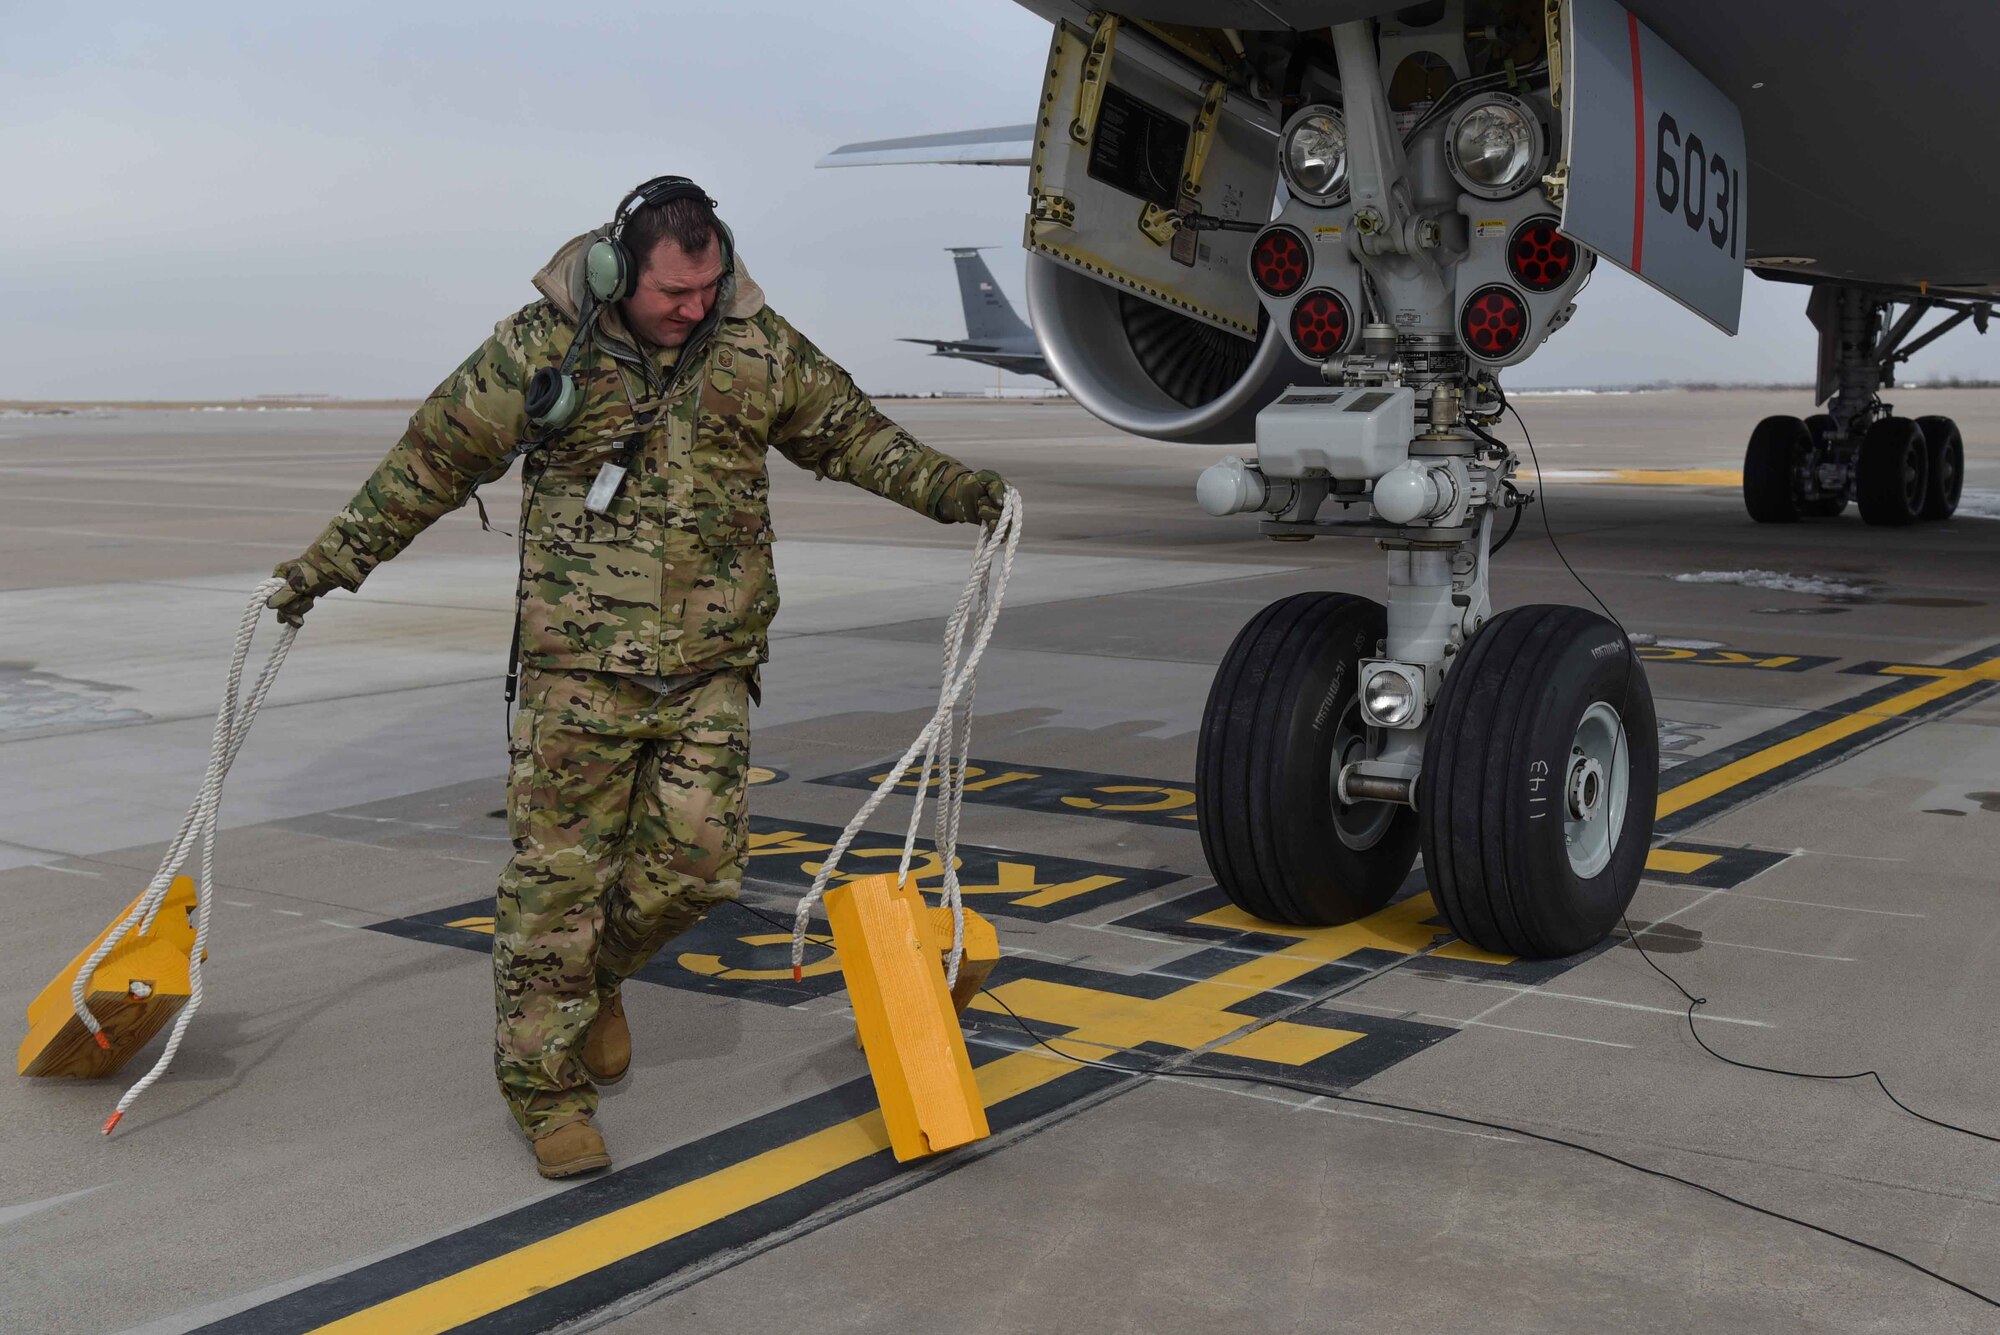 Master Sgt. Scott Perkins, 931st Aircraft Maintenance Squadron crew chief, pulls the chocks from underneath the KC-46A Pegasus before taxi Feb. 21, 2019, at McConnell Air Force Base, Kan. McConnell has taken various steps toward operationally flying the new aircraft, including facility improvements holding KC-46 simulators and a fuselage trainer. After all the procedures in the familiarization period are complete, McConnell will be able to operationally fly and refuel with the aircraft. (This photo has been altered for security purposes by blurring out identification badges) (U.S. Air Force photo by Airman 1st Class Alexi Myrick)